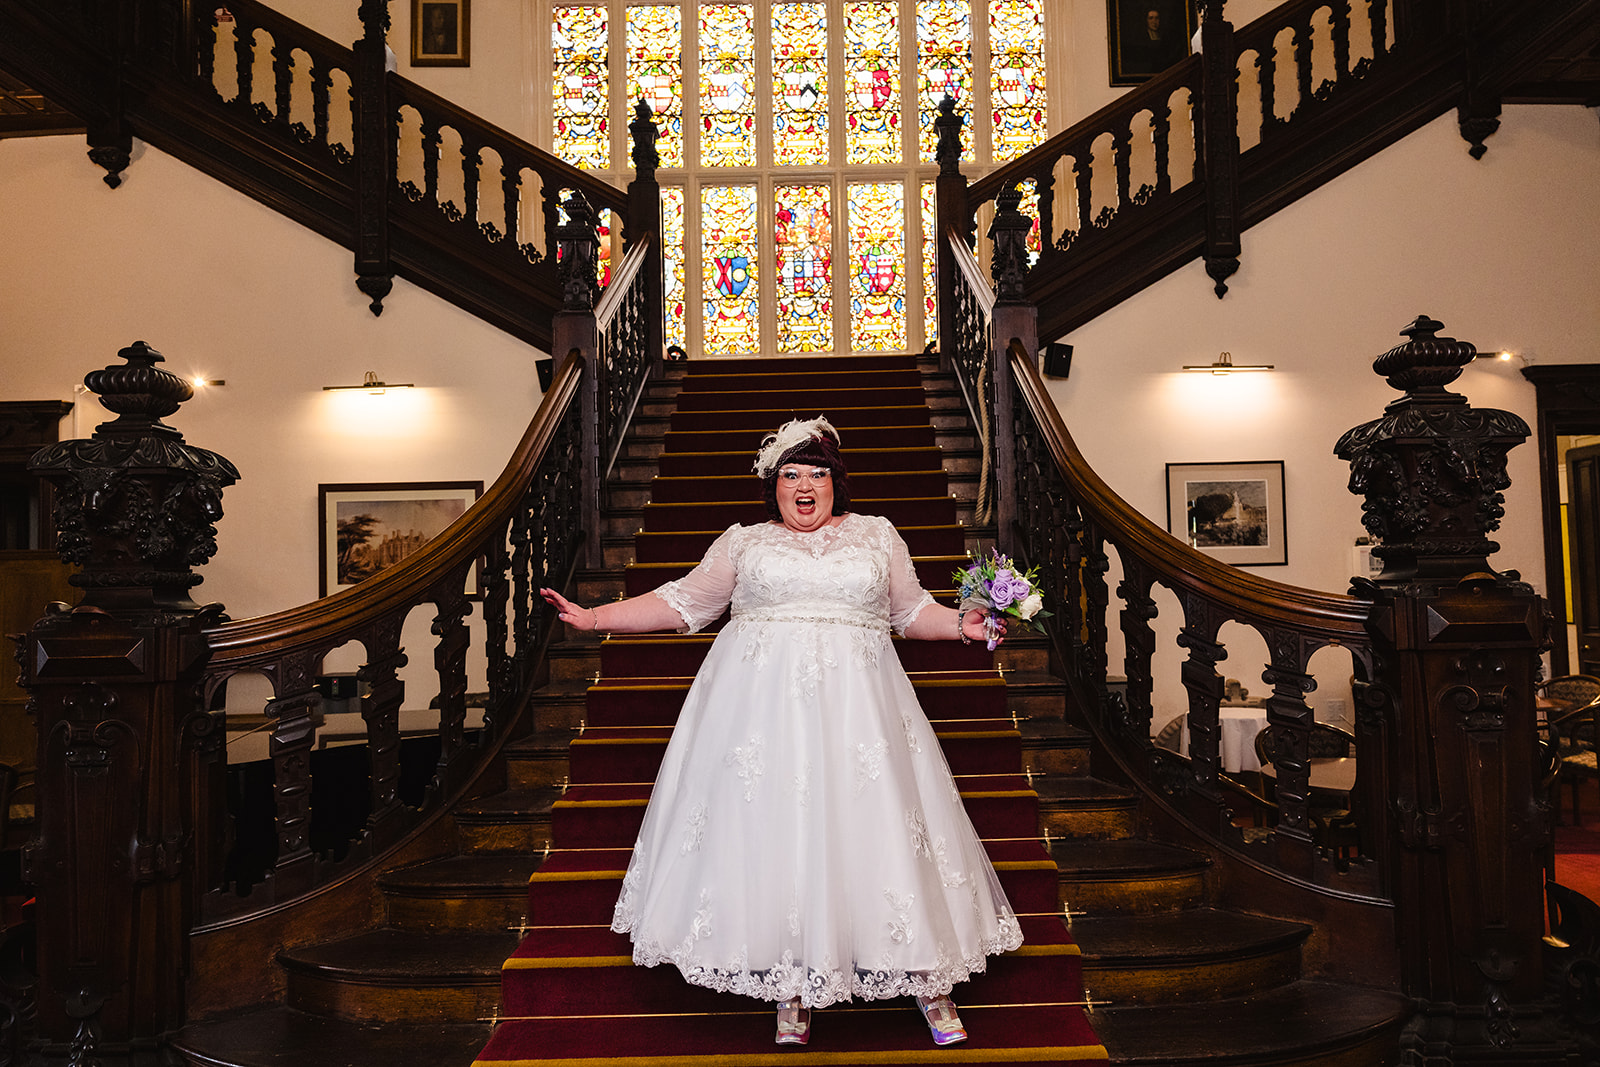 Bride at Grand staircase in Beaumanor Hall